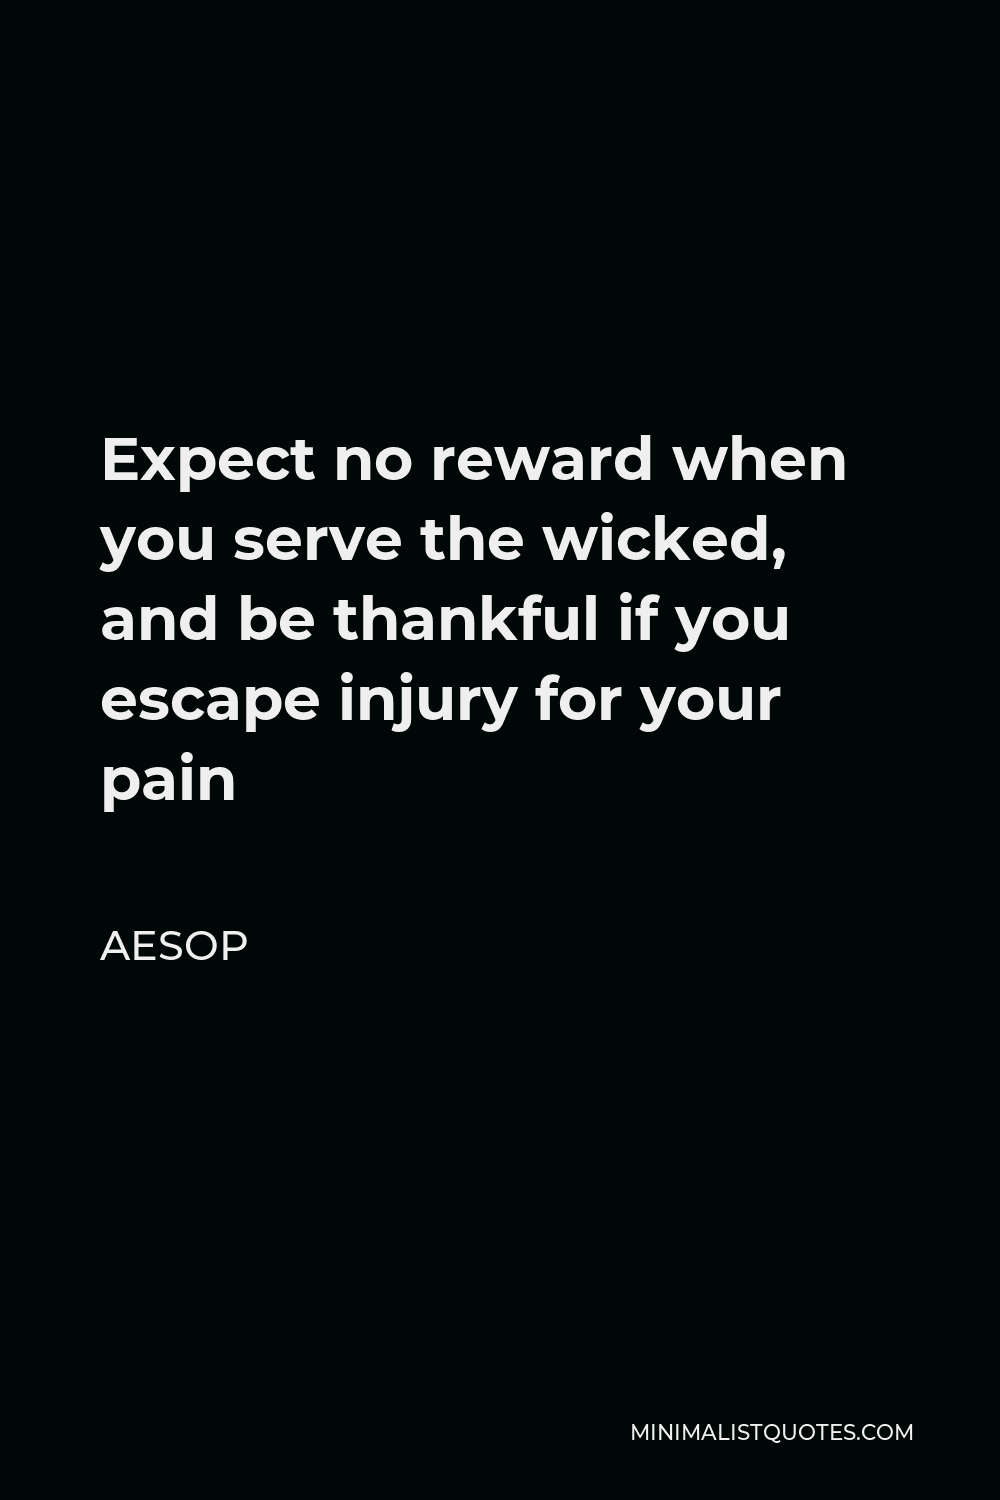 Aesop Quote - Expect no reward when you serve the wicked, and be thankful if you escape injury for your pain